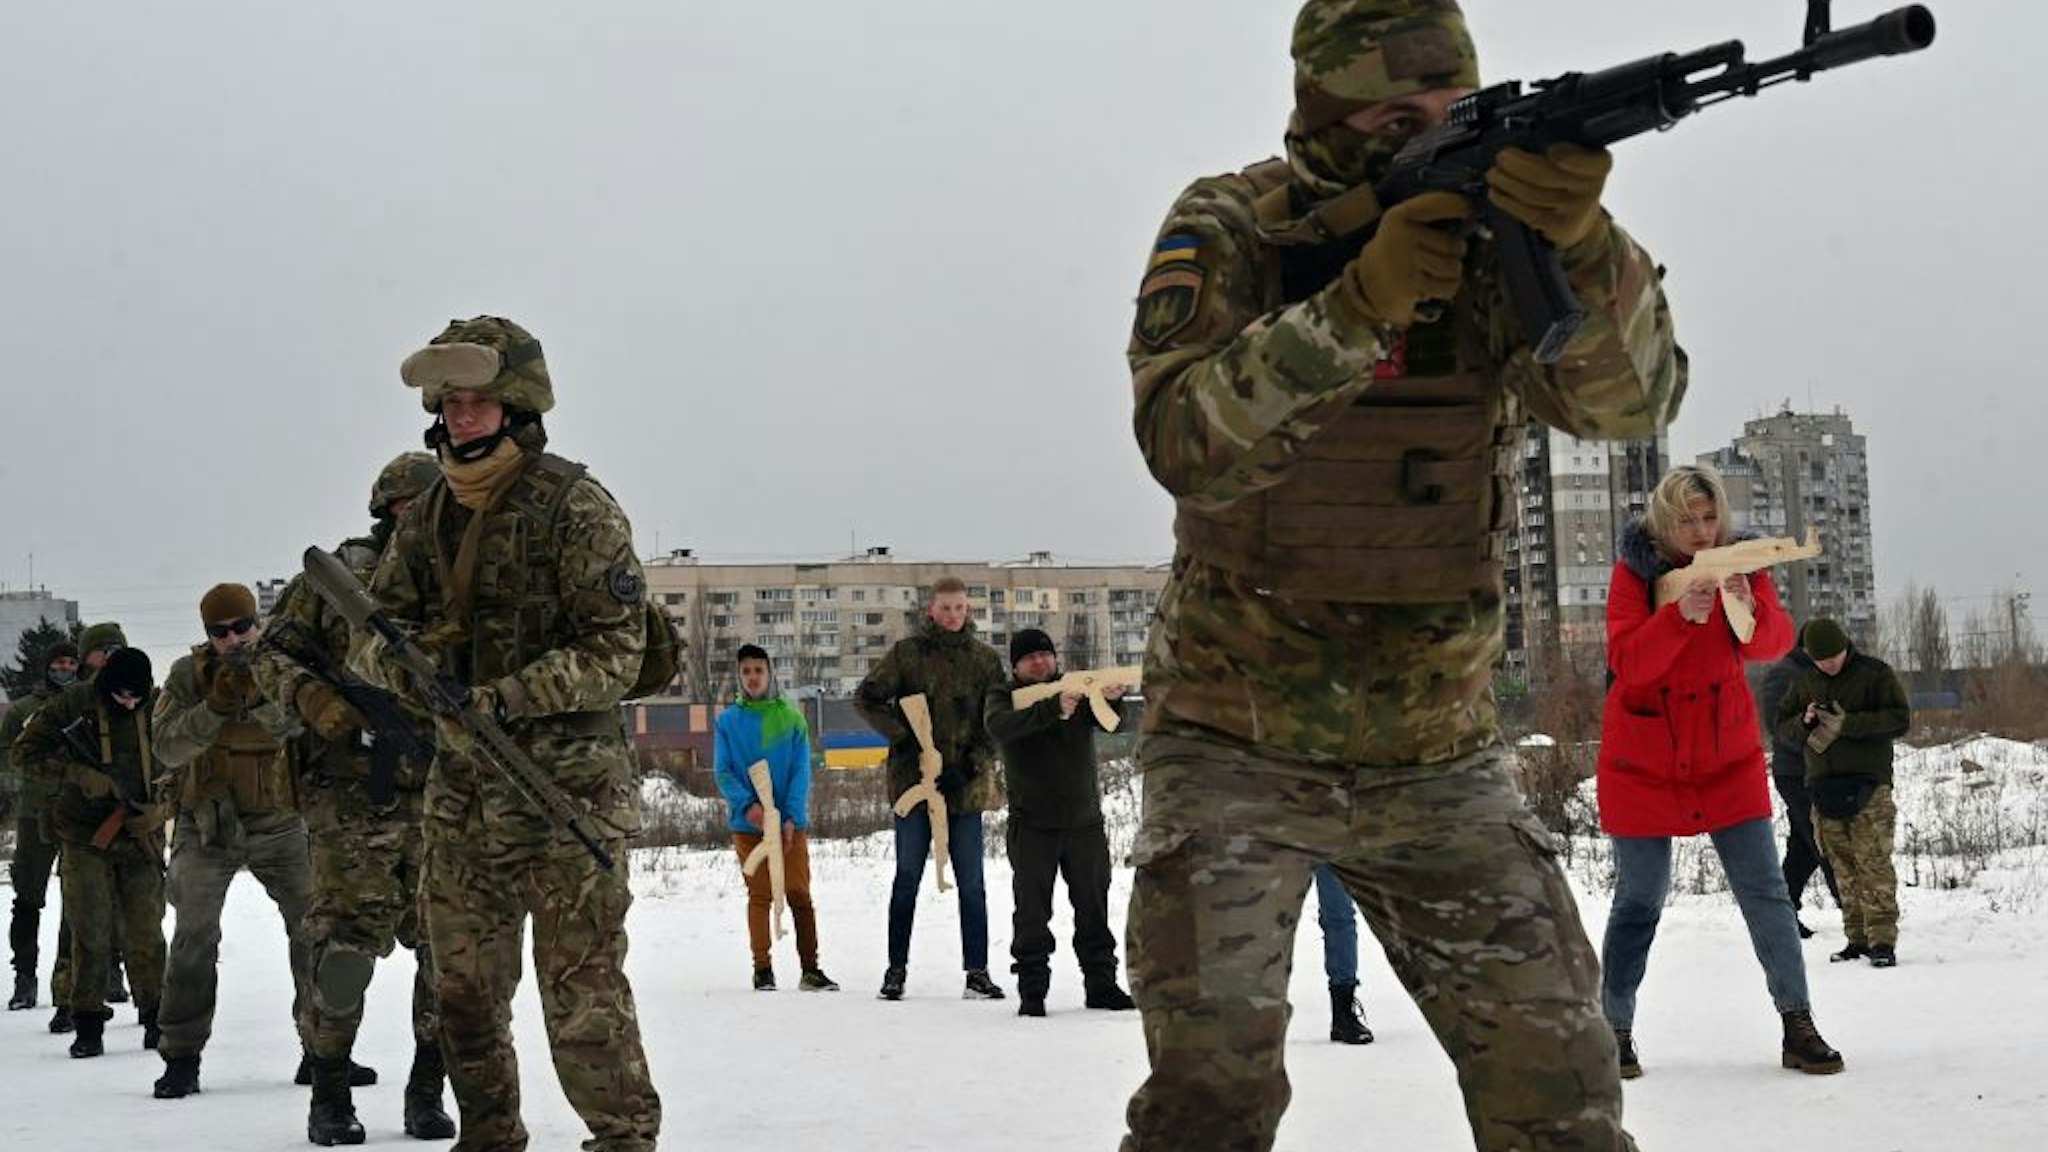 A military instructor teaches civilians holding wooden replicas of Kalashnikov rifles, as they take part in a training session at an abandoned factory in the Ukrainian capital of Kyiv on February 6, 2022.